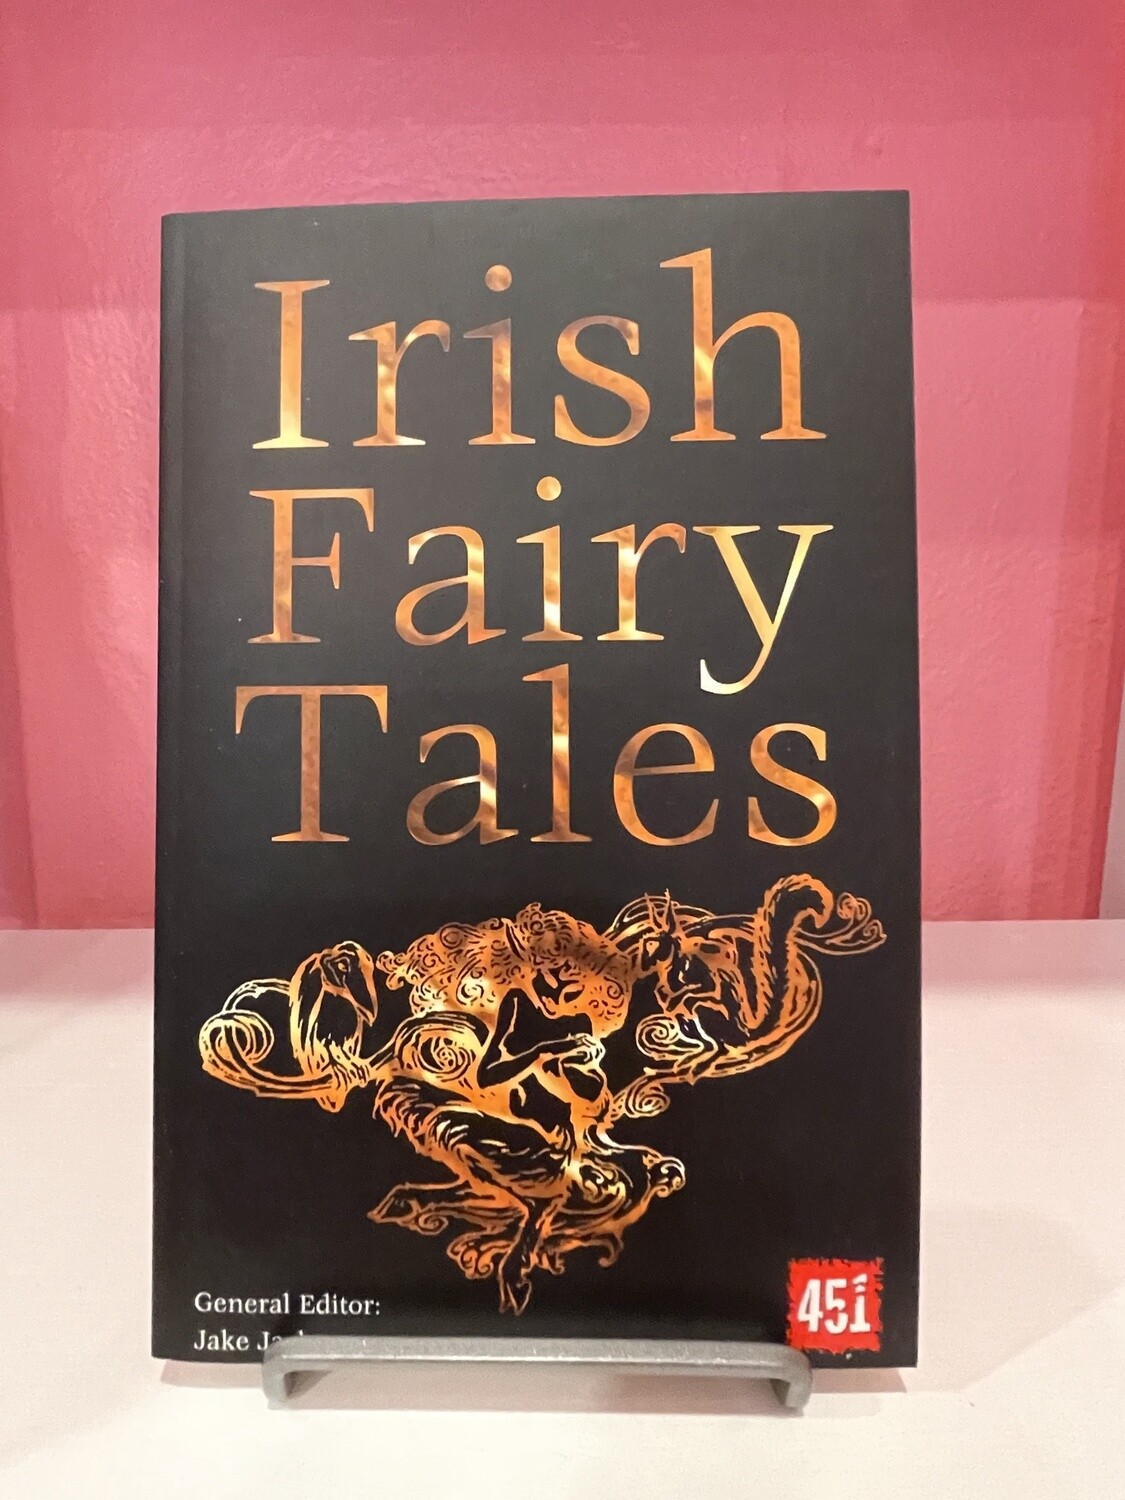 Irish Fairy Tales (The World's Greatest Myths and Legends)